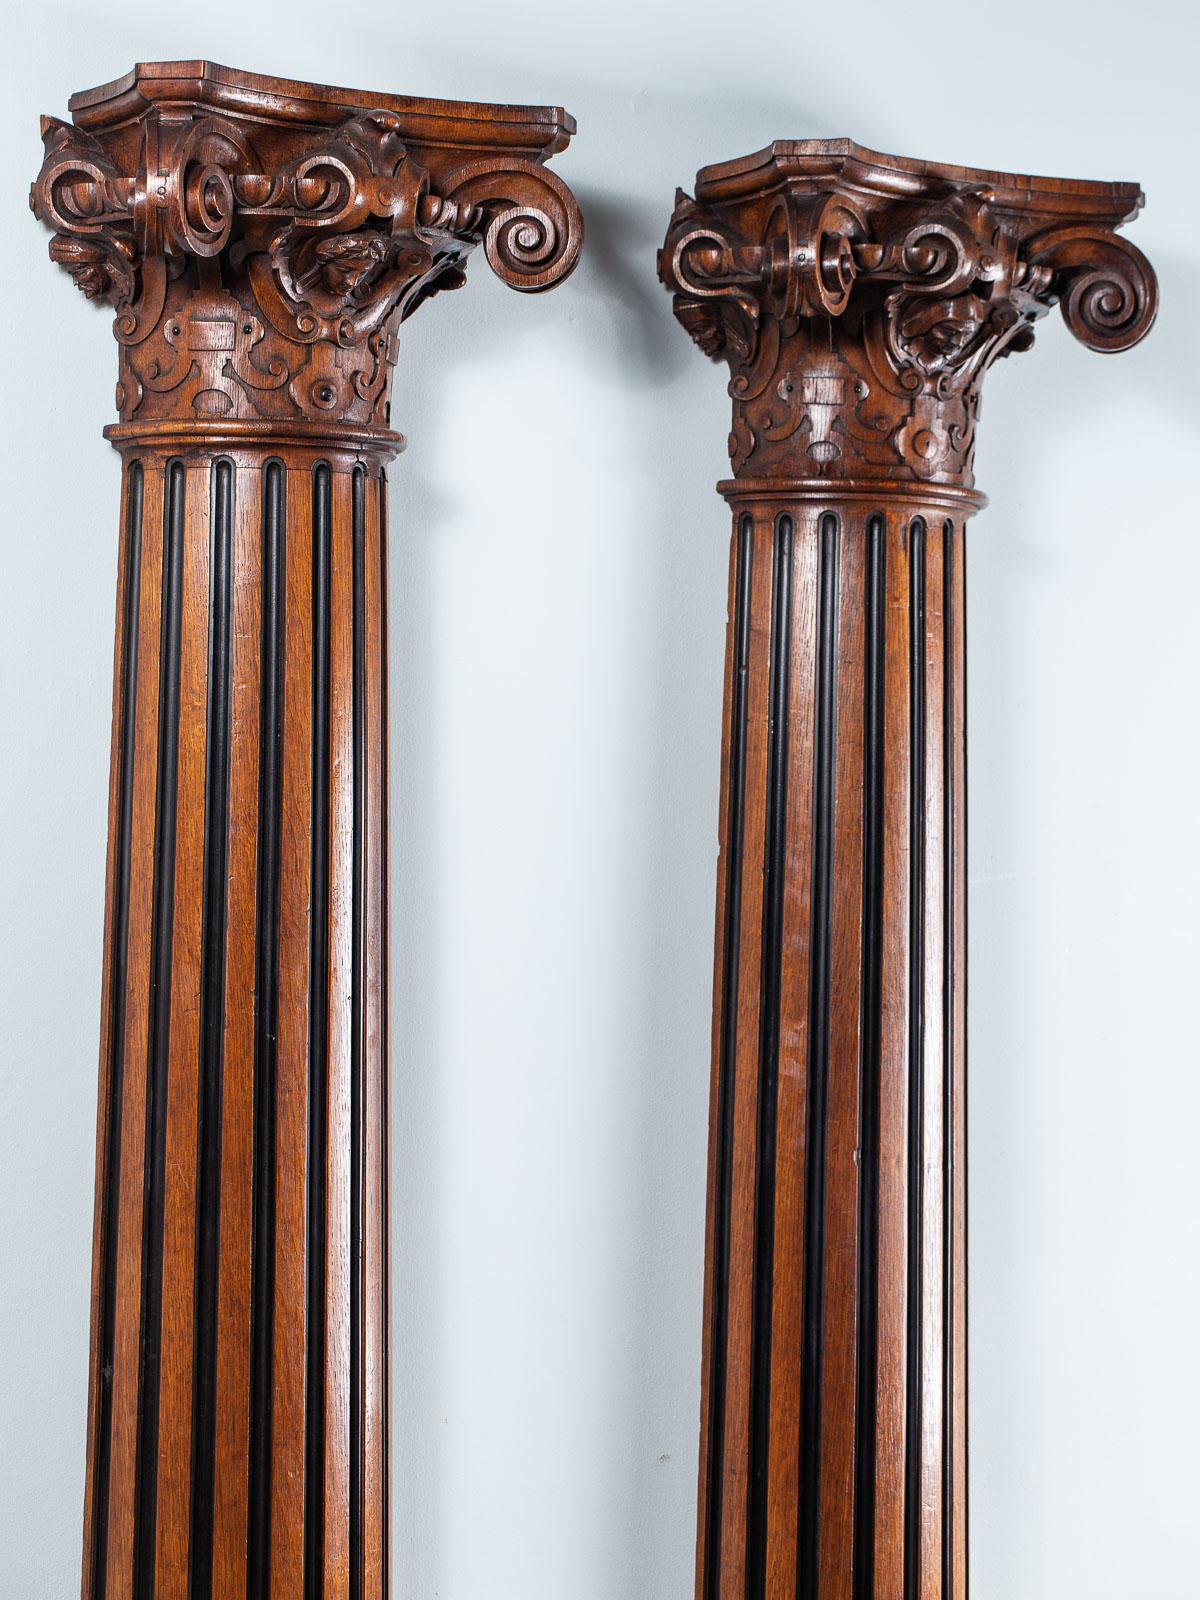 Pair of Antique French Architectural Henri II Columns, circa 1860 For Sale 2